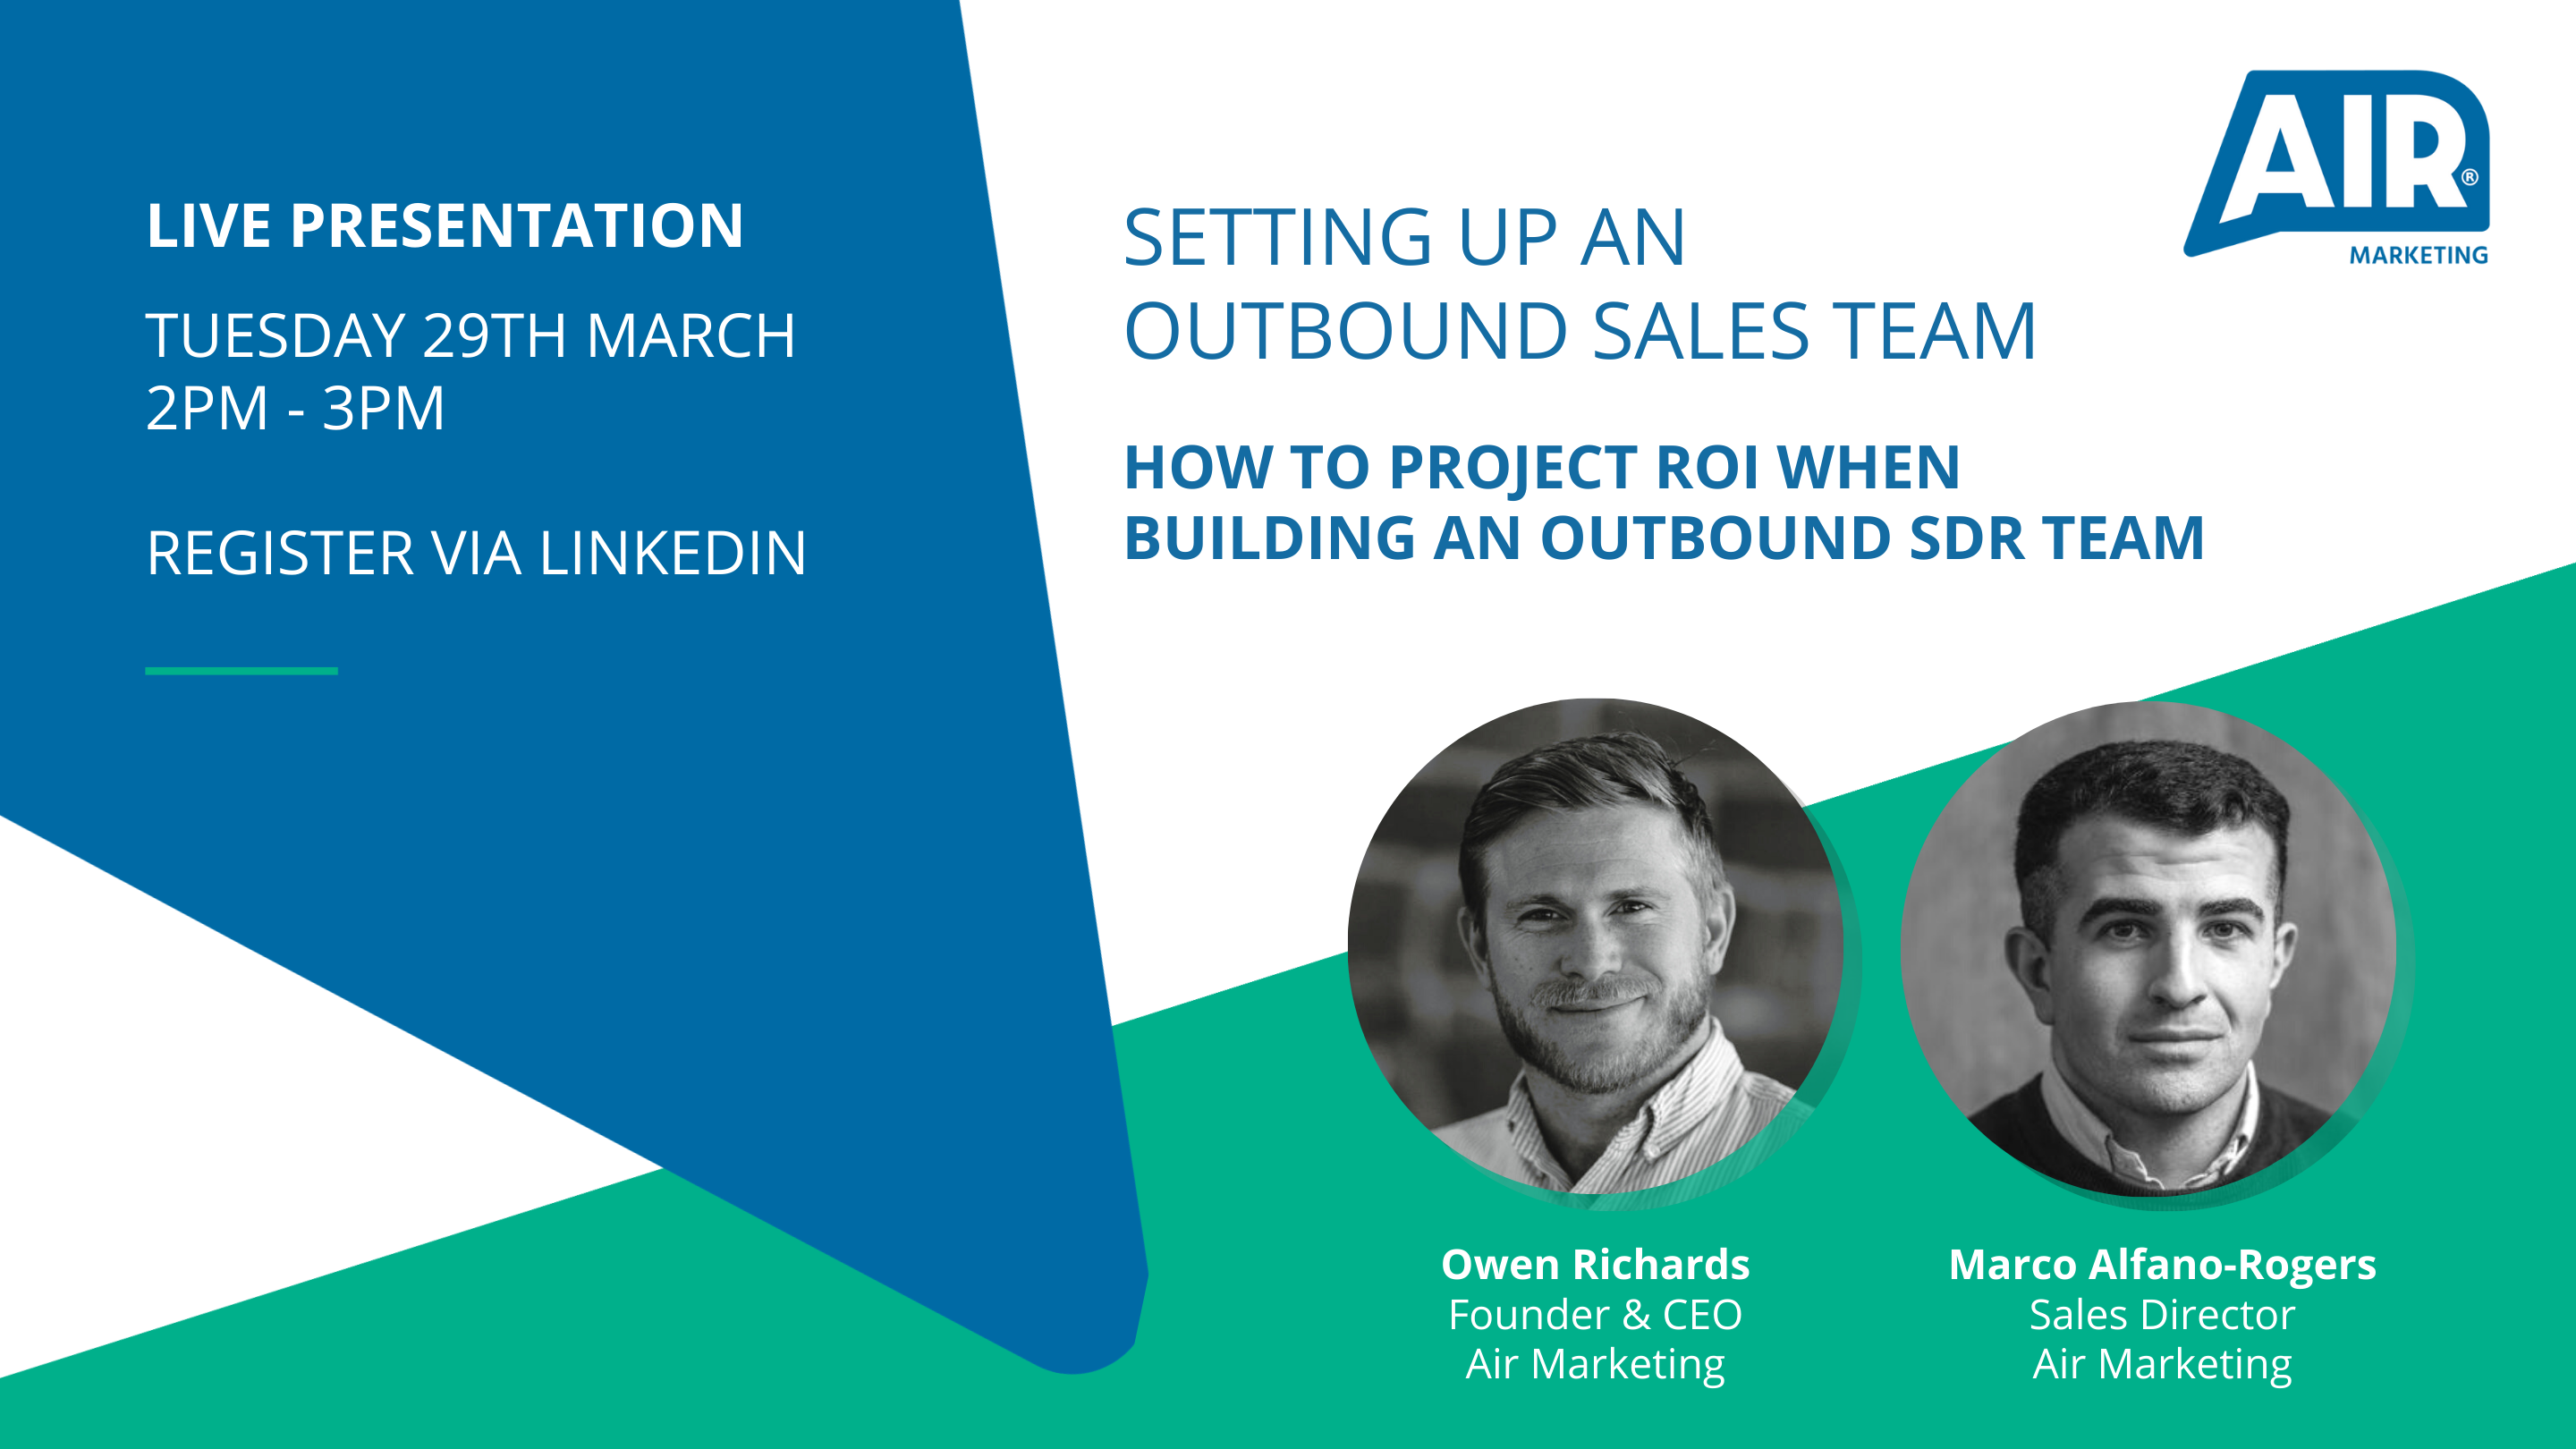 LIVE Presentation: How To Project ROI When Building An Outbound SDR Team